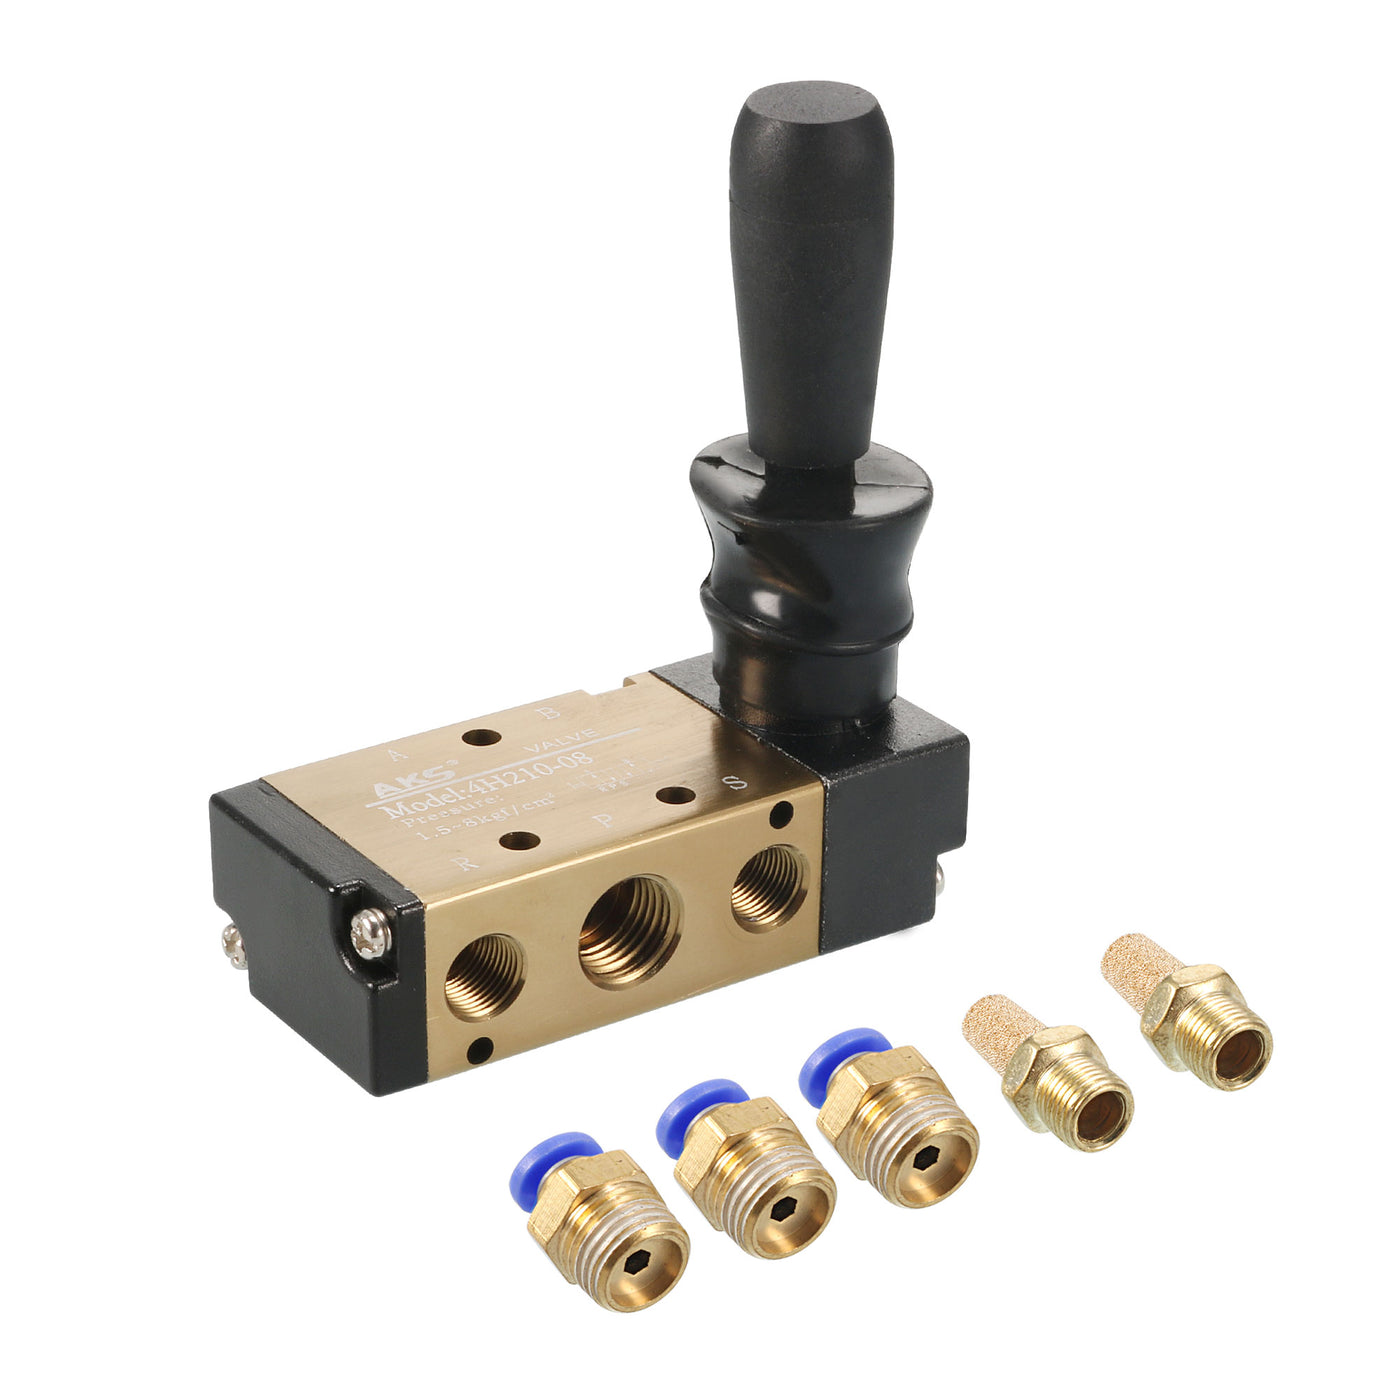 uxcell Uxcell Manual Hand Pull Solenoid Valve 2 Position 5 Way Pneumatic 1/4" PT Air Hand Lever Operated Valve with 4mm OD Connect Fitting and Brass Exhaust Muffler